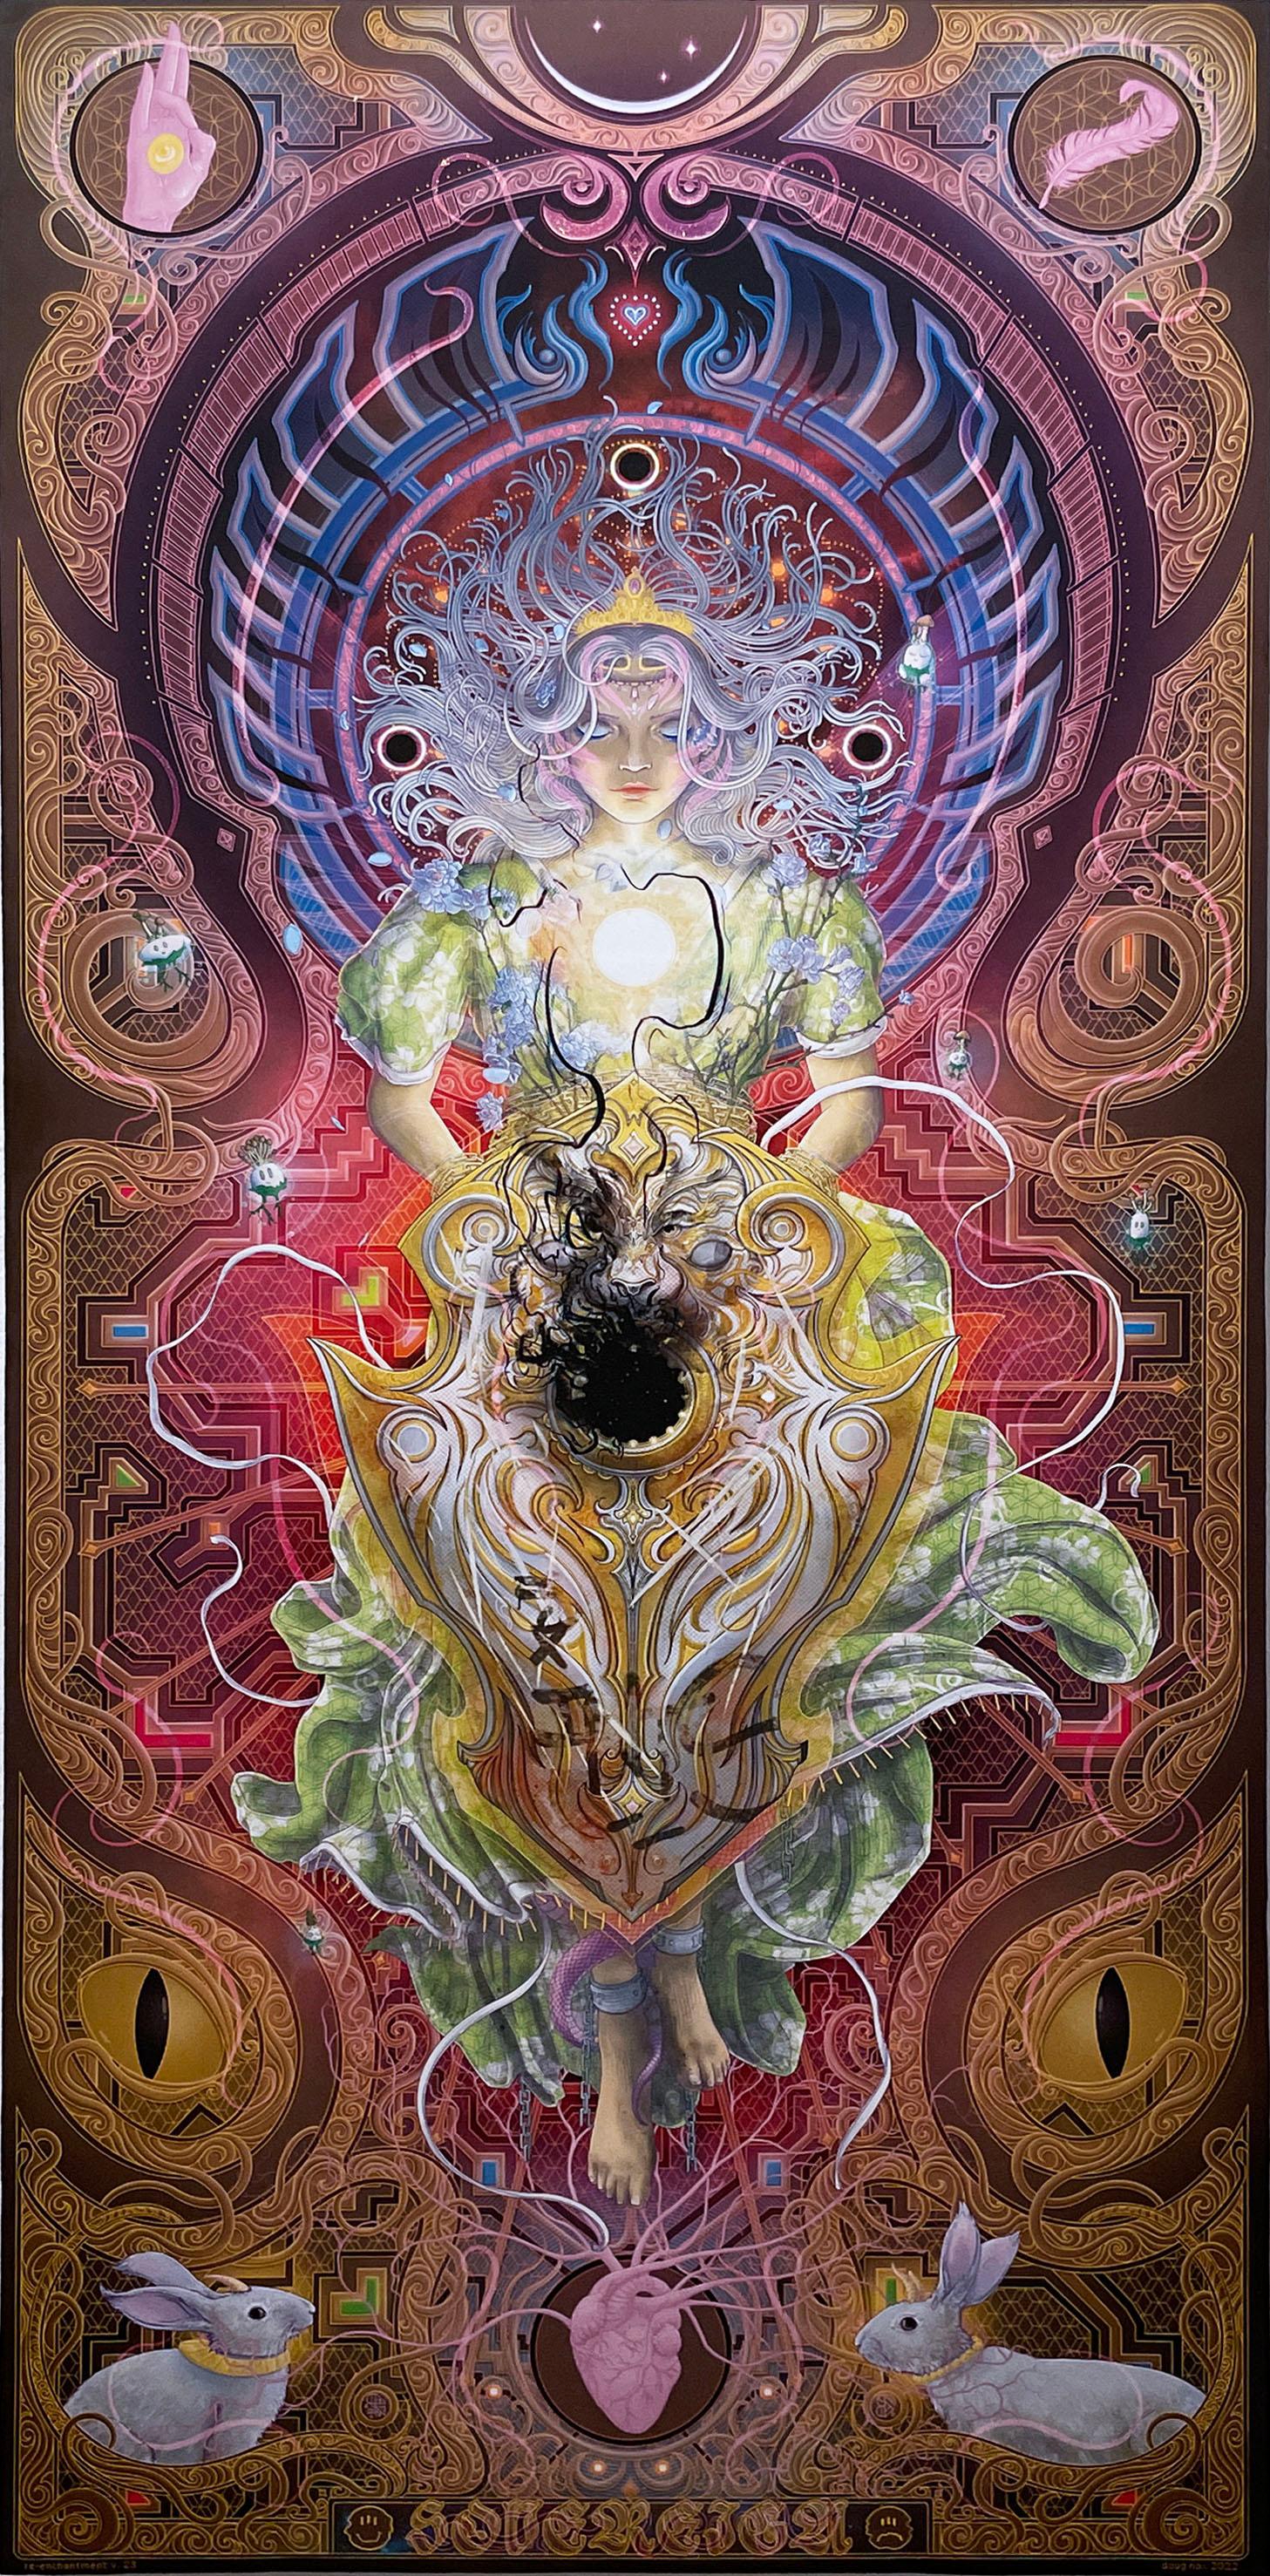 Sovereign Shield (2022) by Doug Nox (Harlequinade), psychedelic, cosmic, giclée